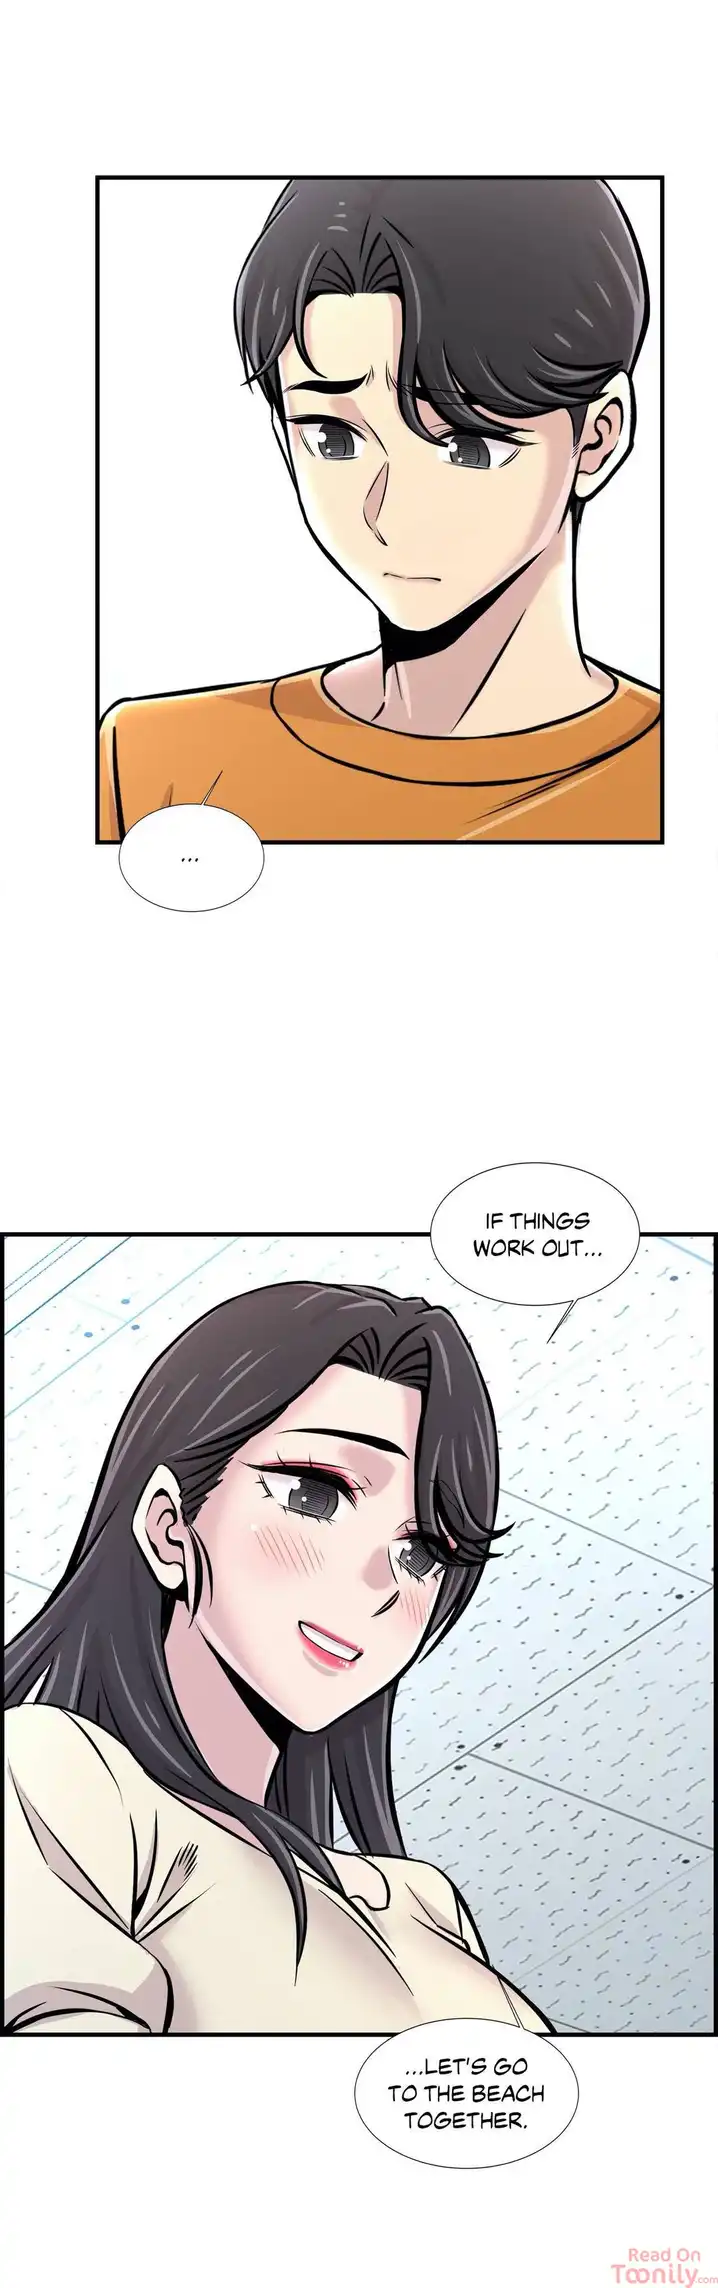 Cram School Scandal - Chapter 25 Page 24